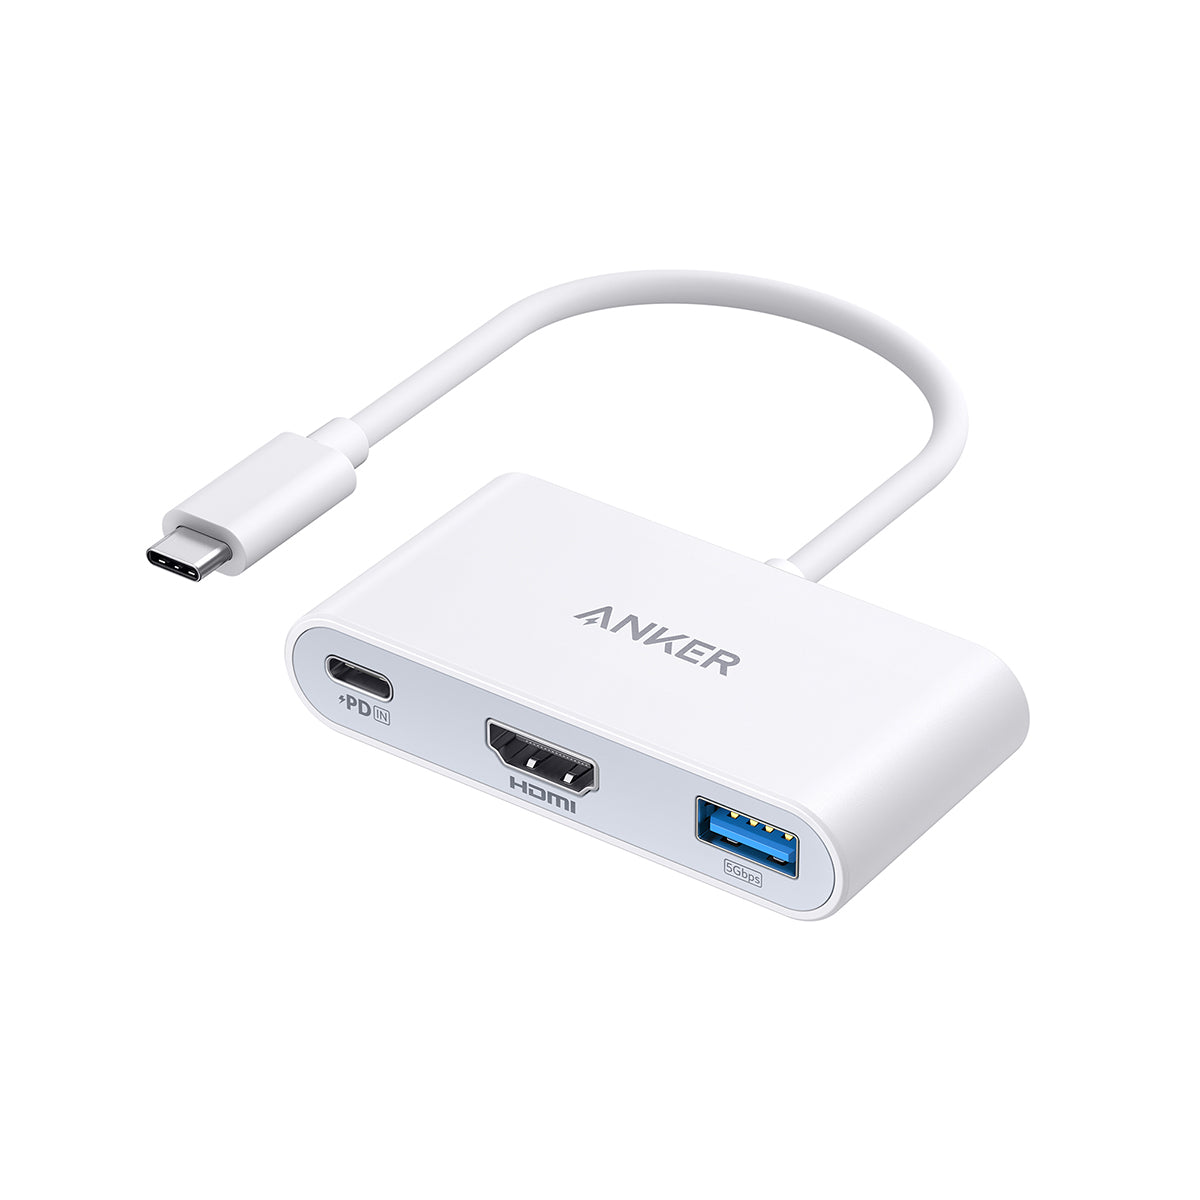 Anker PowerExpand 3-in-1 USB-C Power Delivery Hub - White